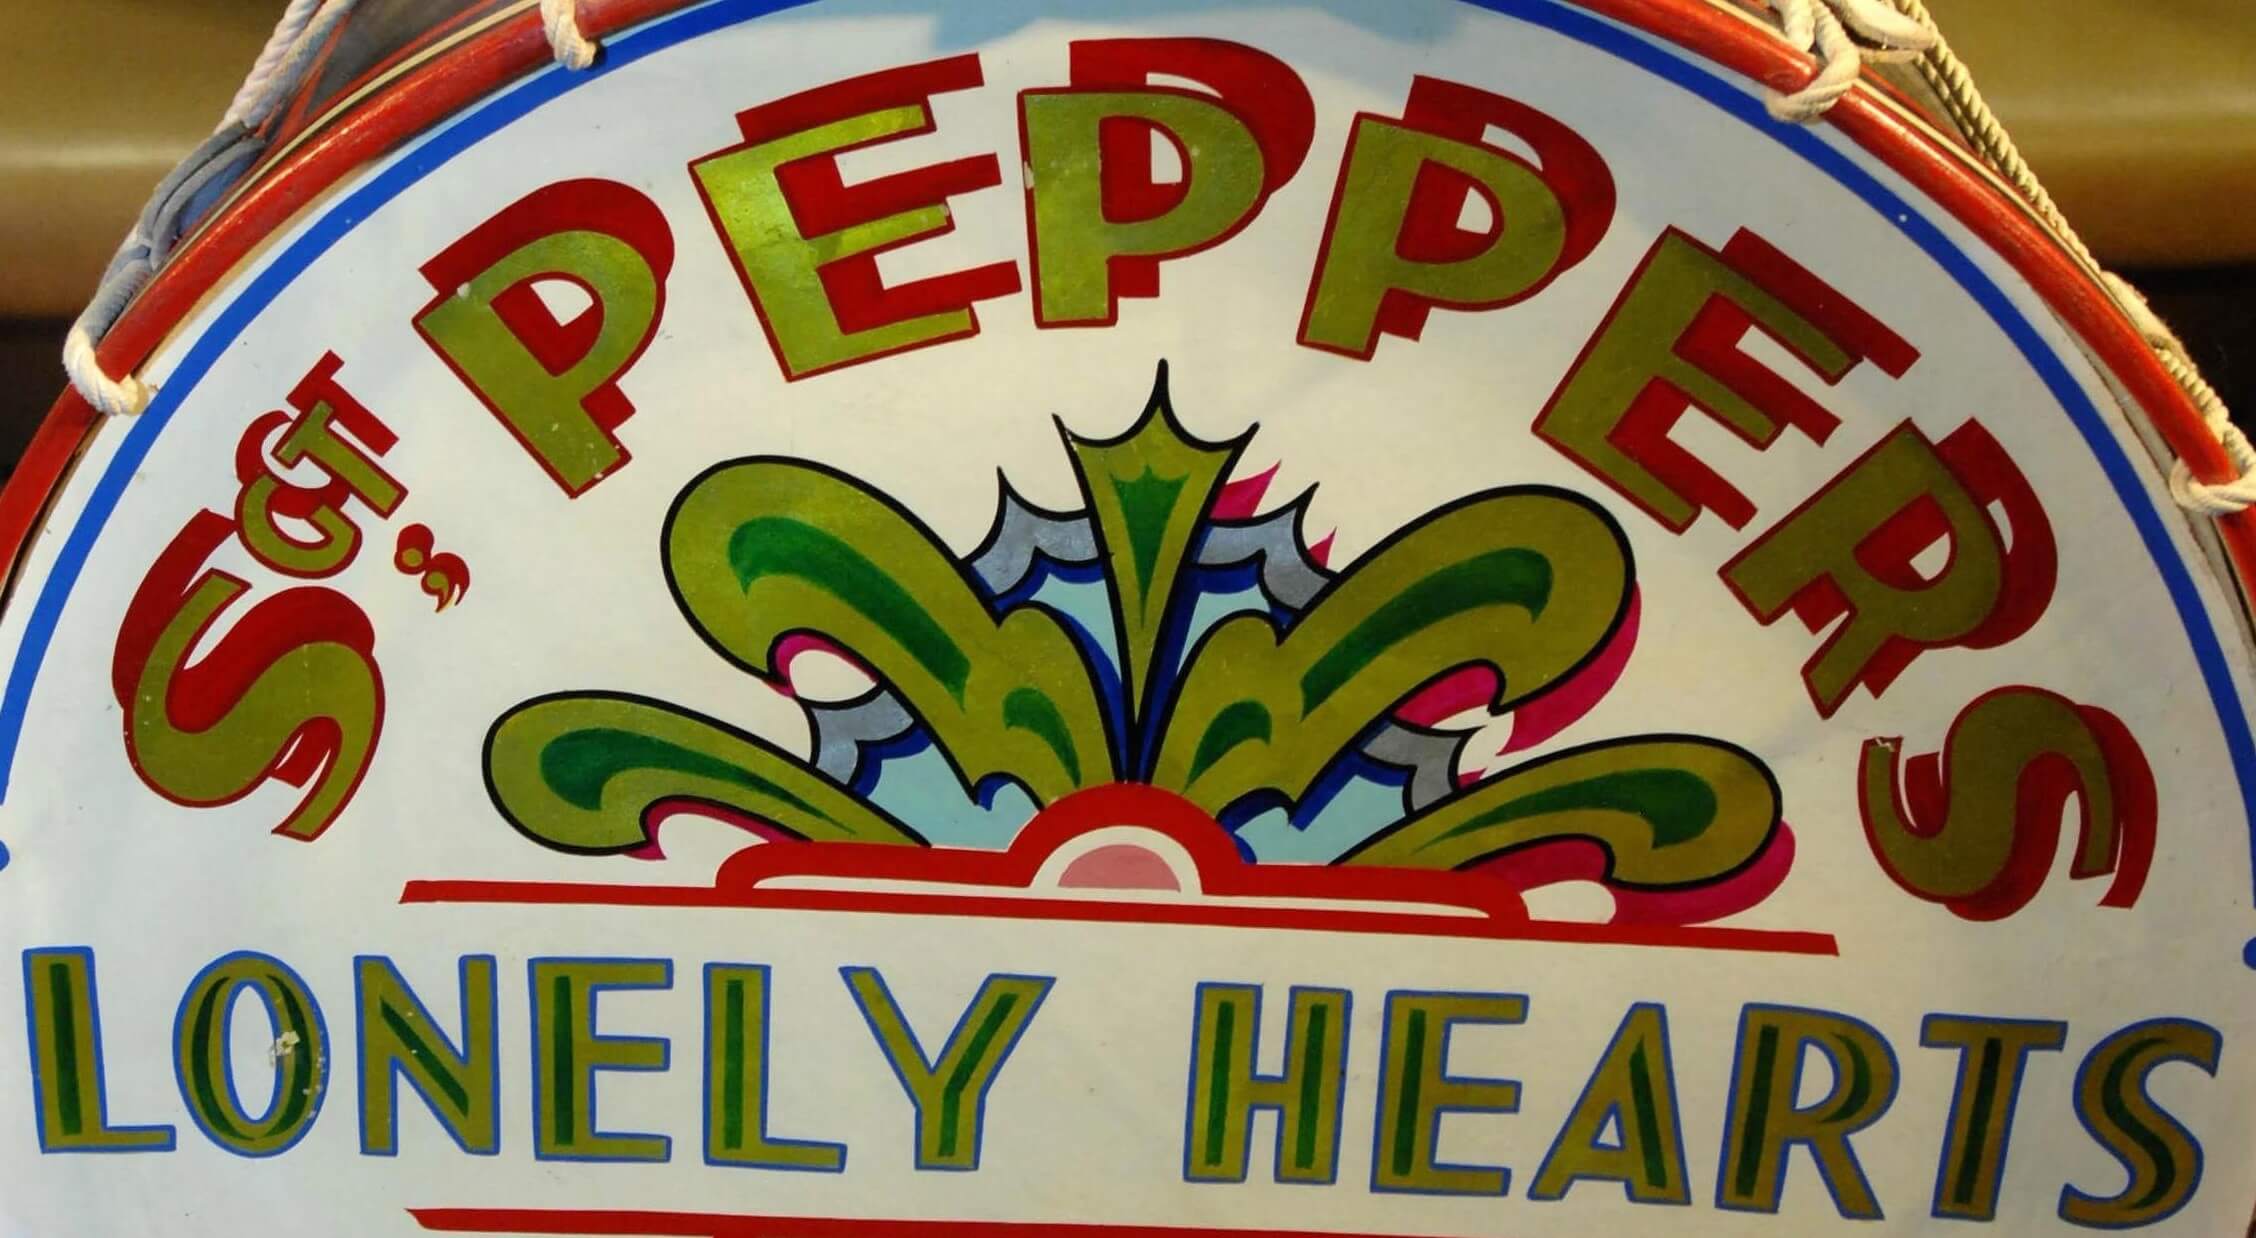 The drum from the cover of The Beatles' 'Sgt. Pepper's Lonely Hearts Club Band'